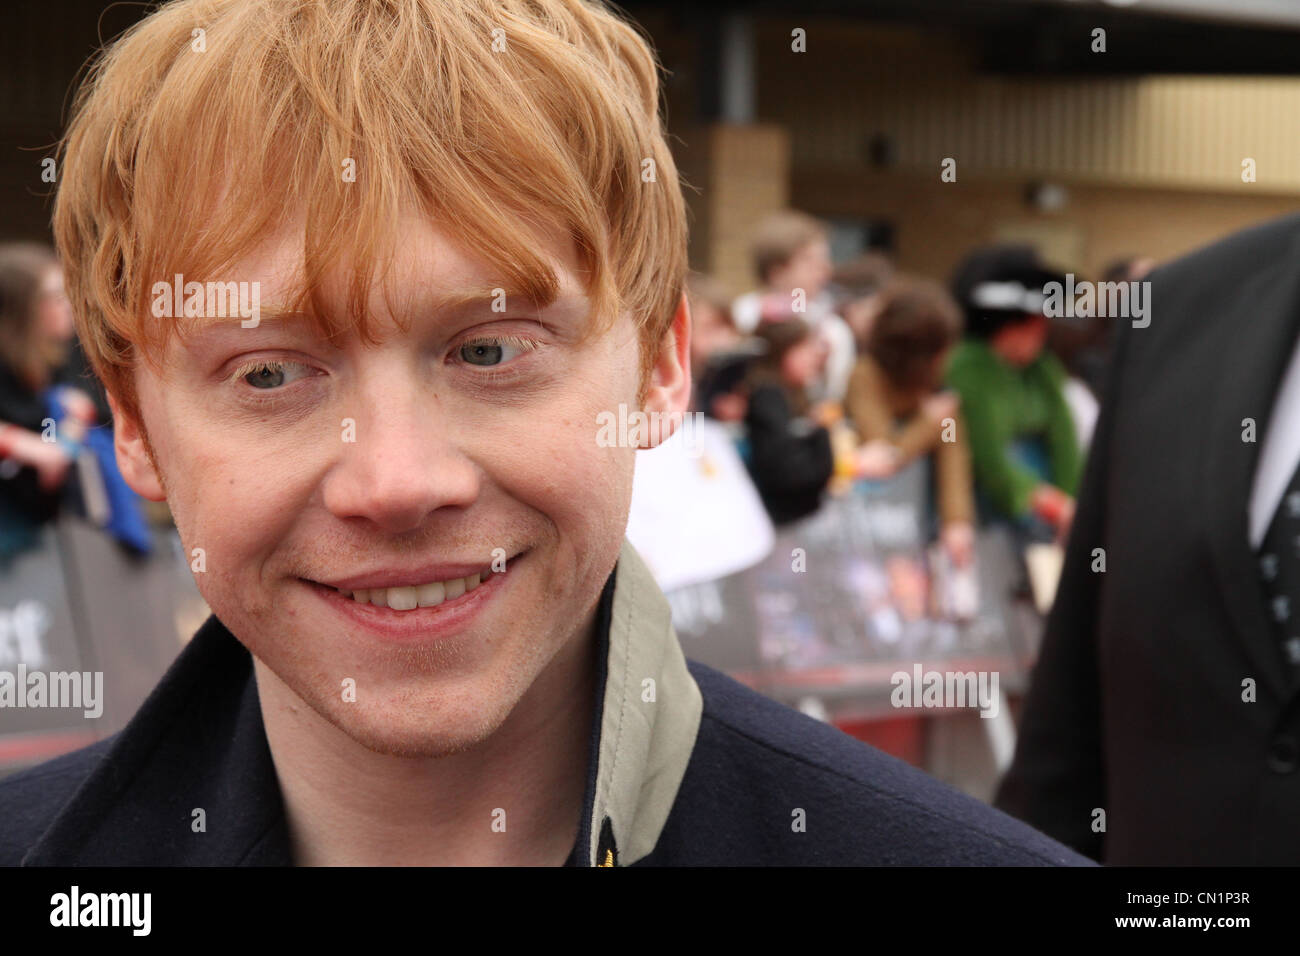 Harry Potter actor Rupert Grint (Ron Weasley) greets the crowd, at the Grand Opening of the Harry Potter Studio Tour Stock Photo